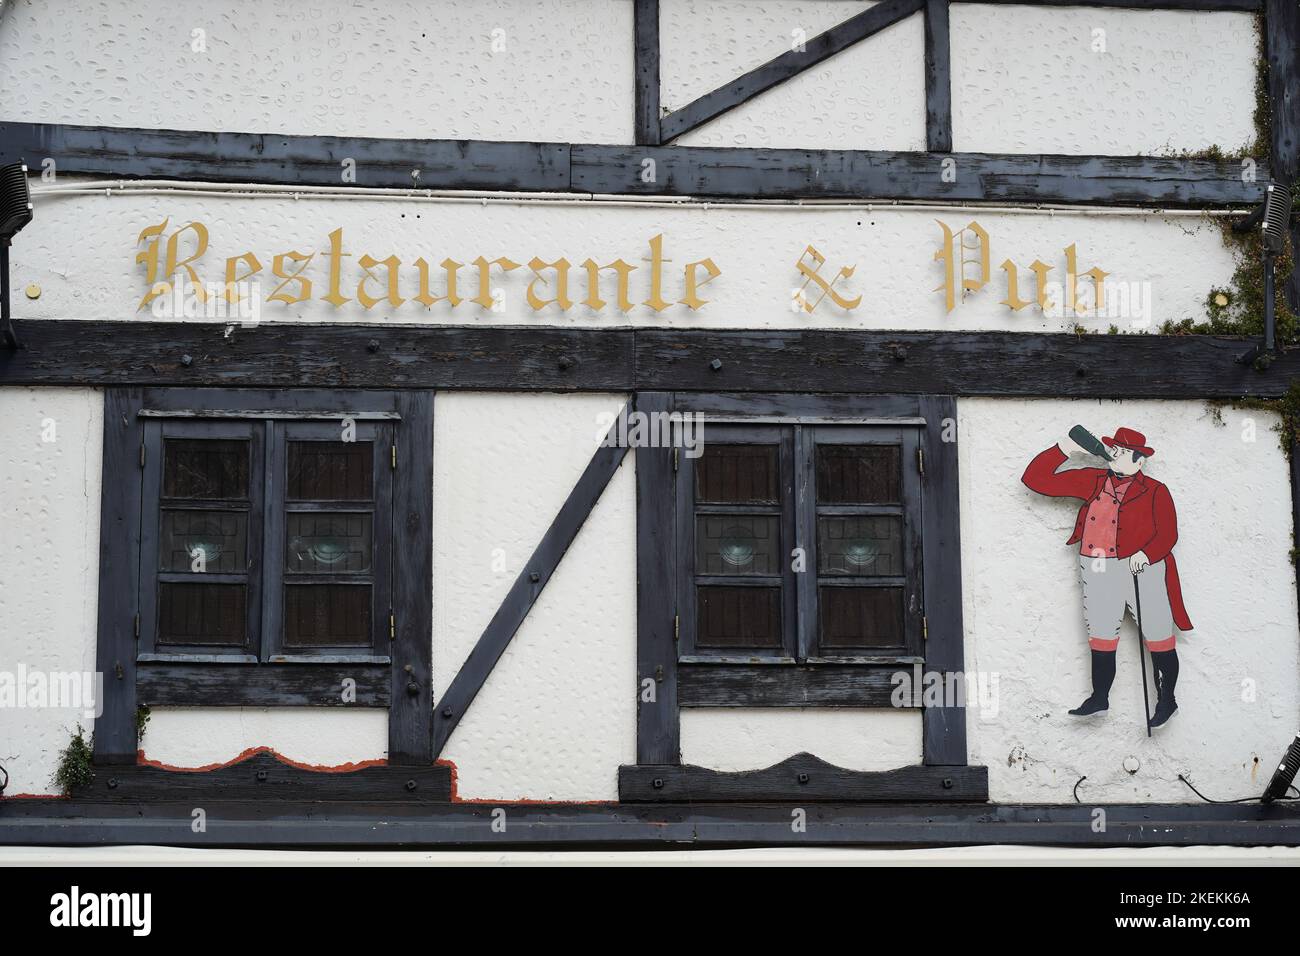 Restaurant and Pub sign with a Tudor style font outside a Tudor style building Stock Photo